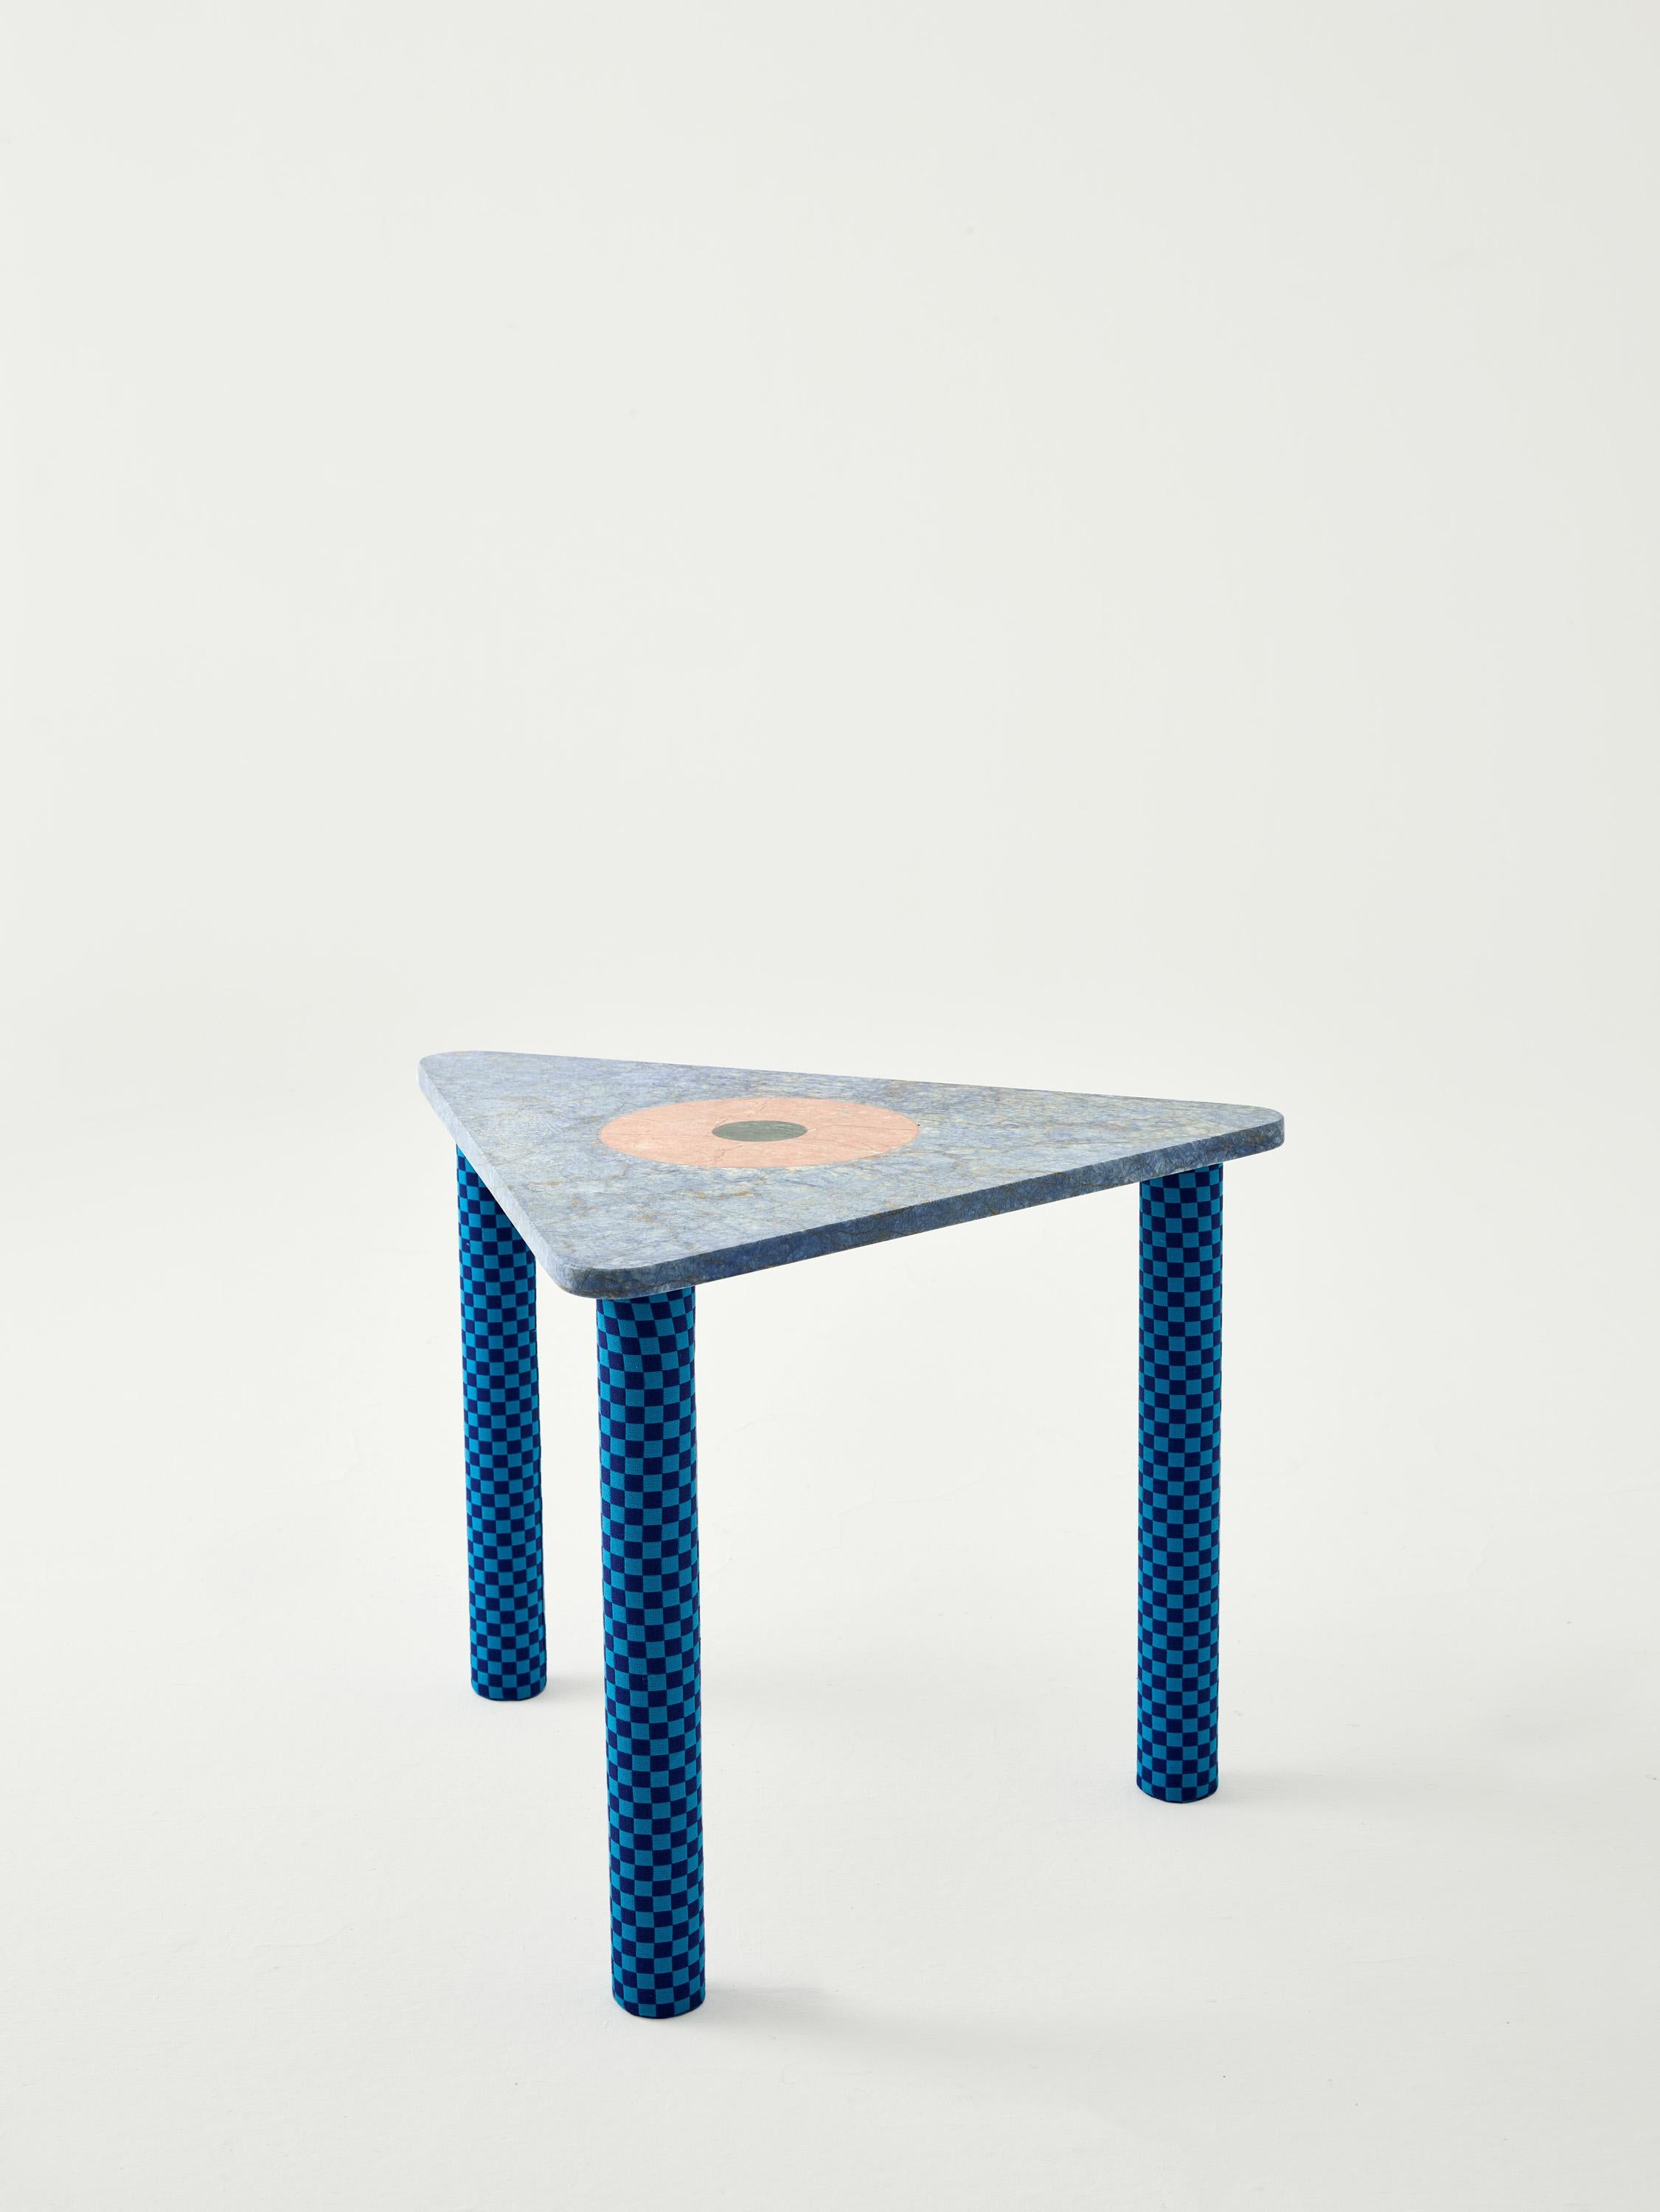 Handcrafted abide marble side tables are the modern interpretation of the iconic evil eye symbol. The evil eye protection consists of an eponymous shield that protects you from the so called evil eyes and indicates spiritual protection. The colorful